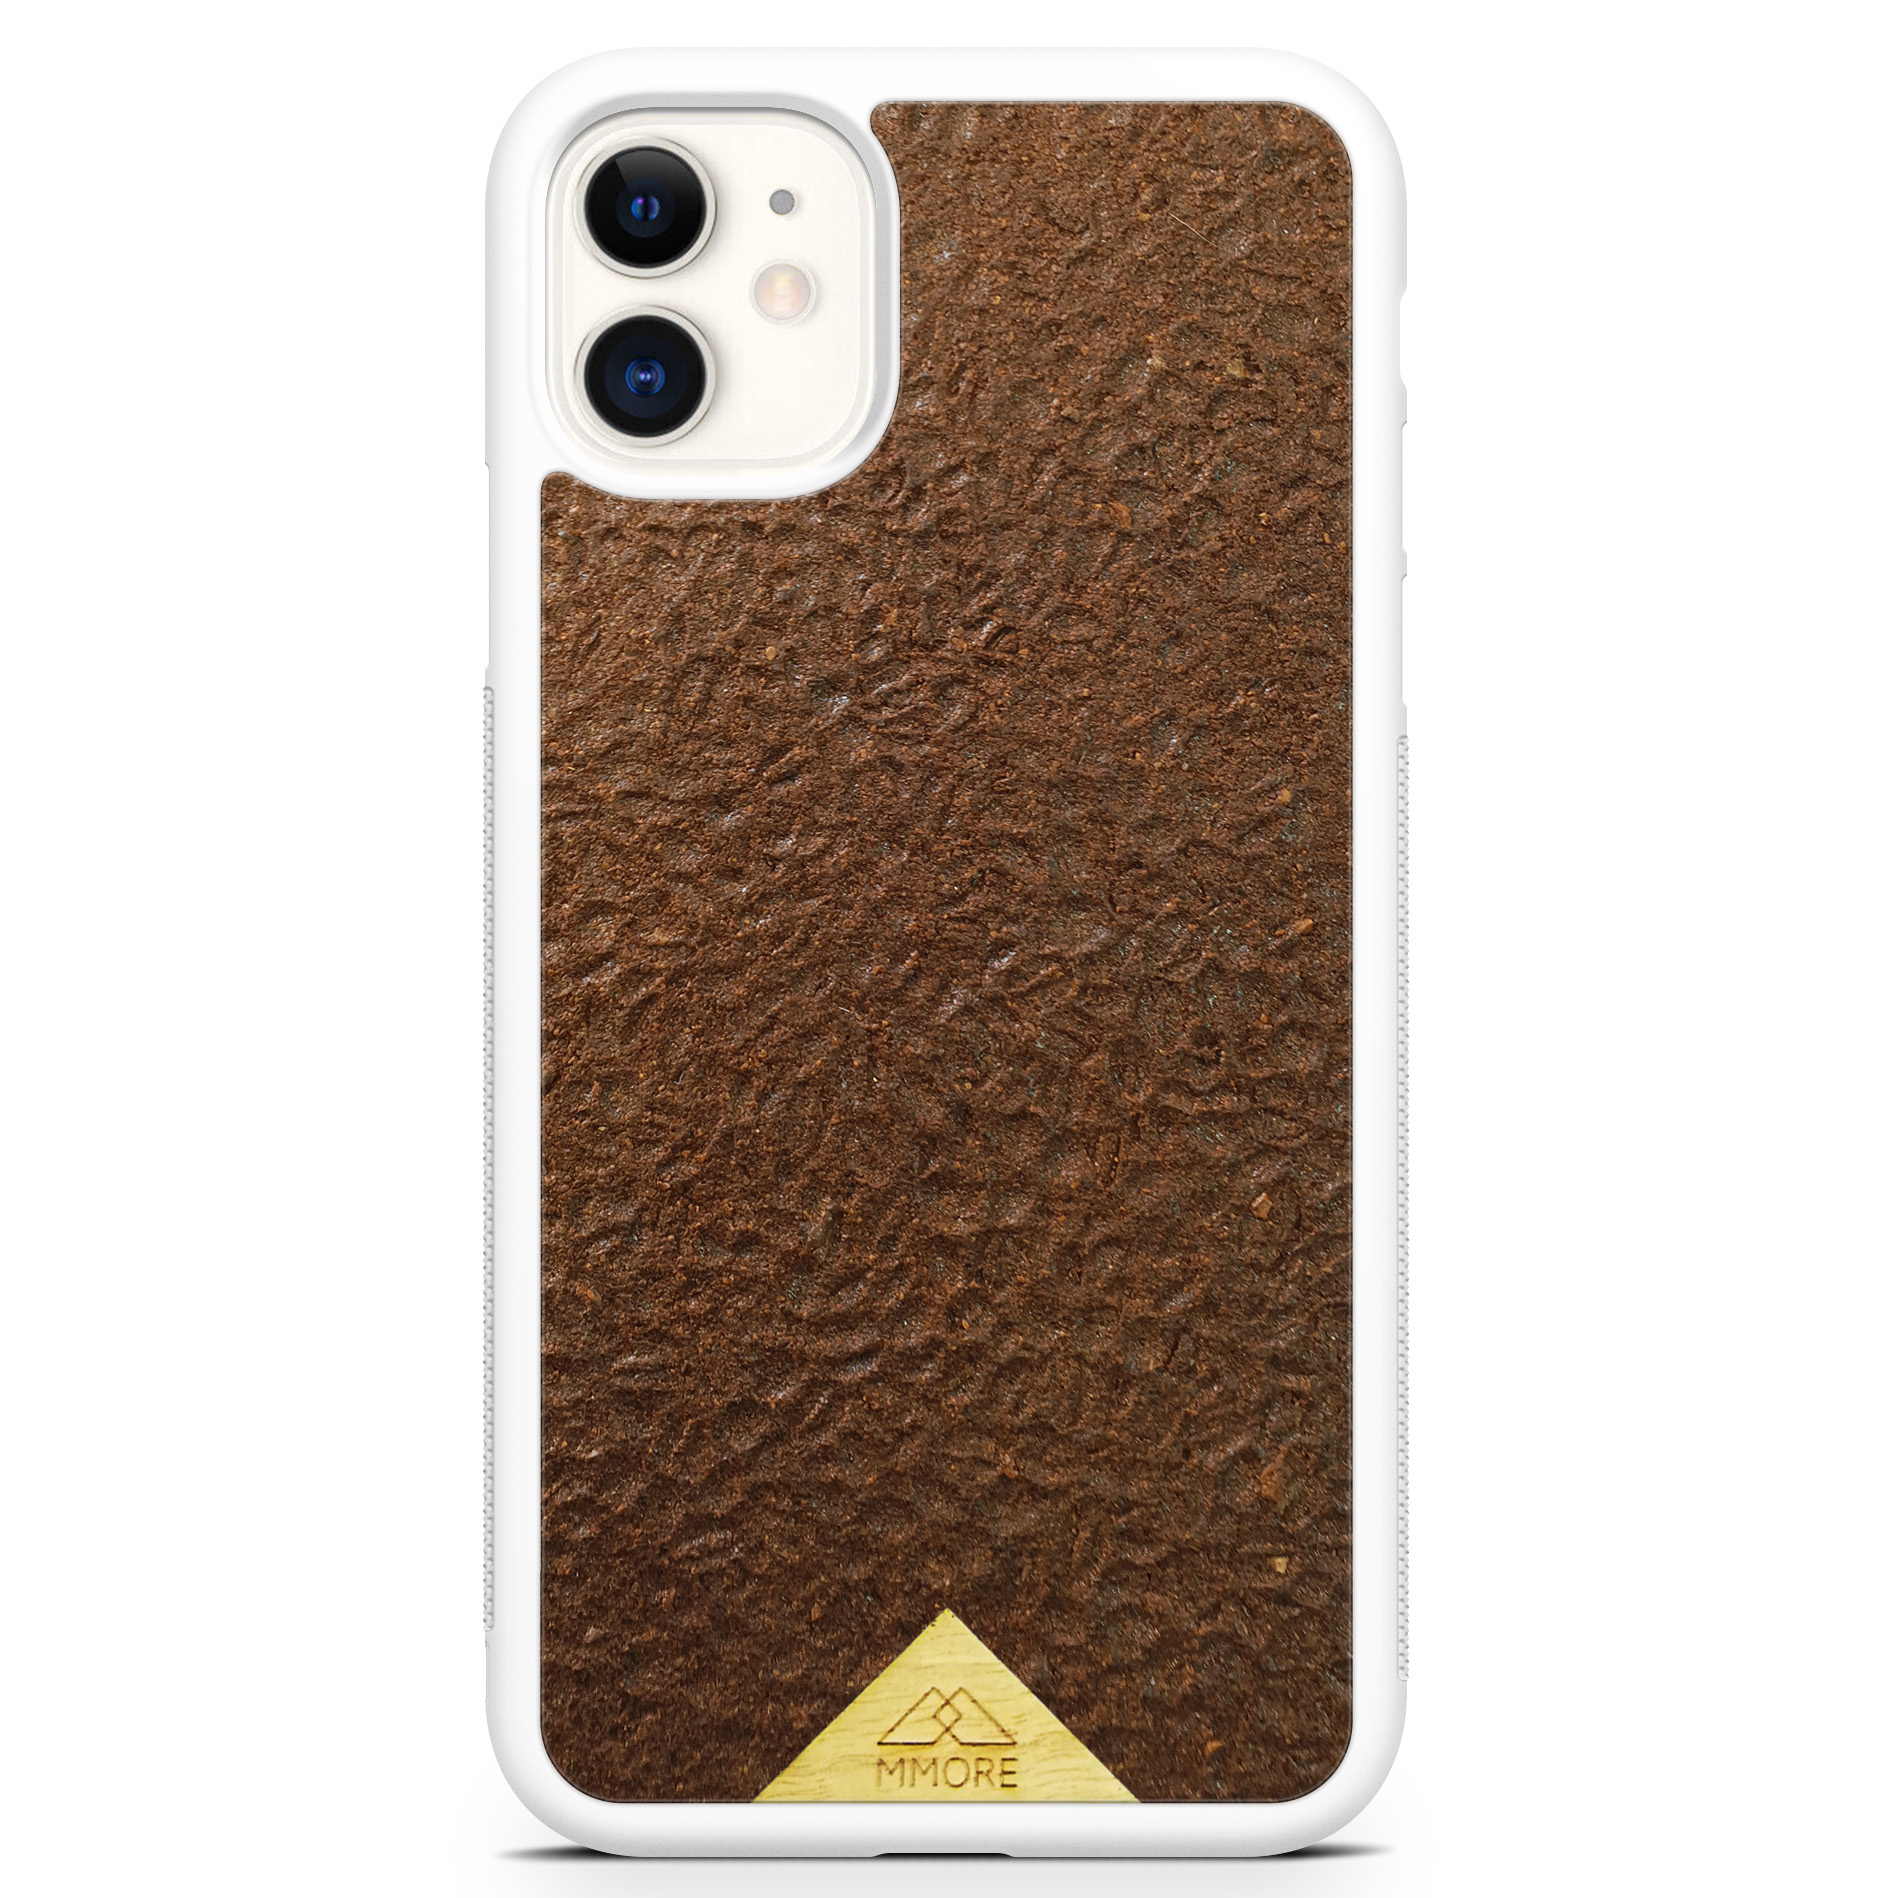 Louis Vuitton Hard case With brand box Model list iPhone X iPhone